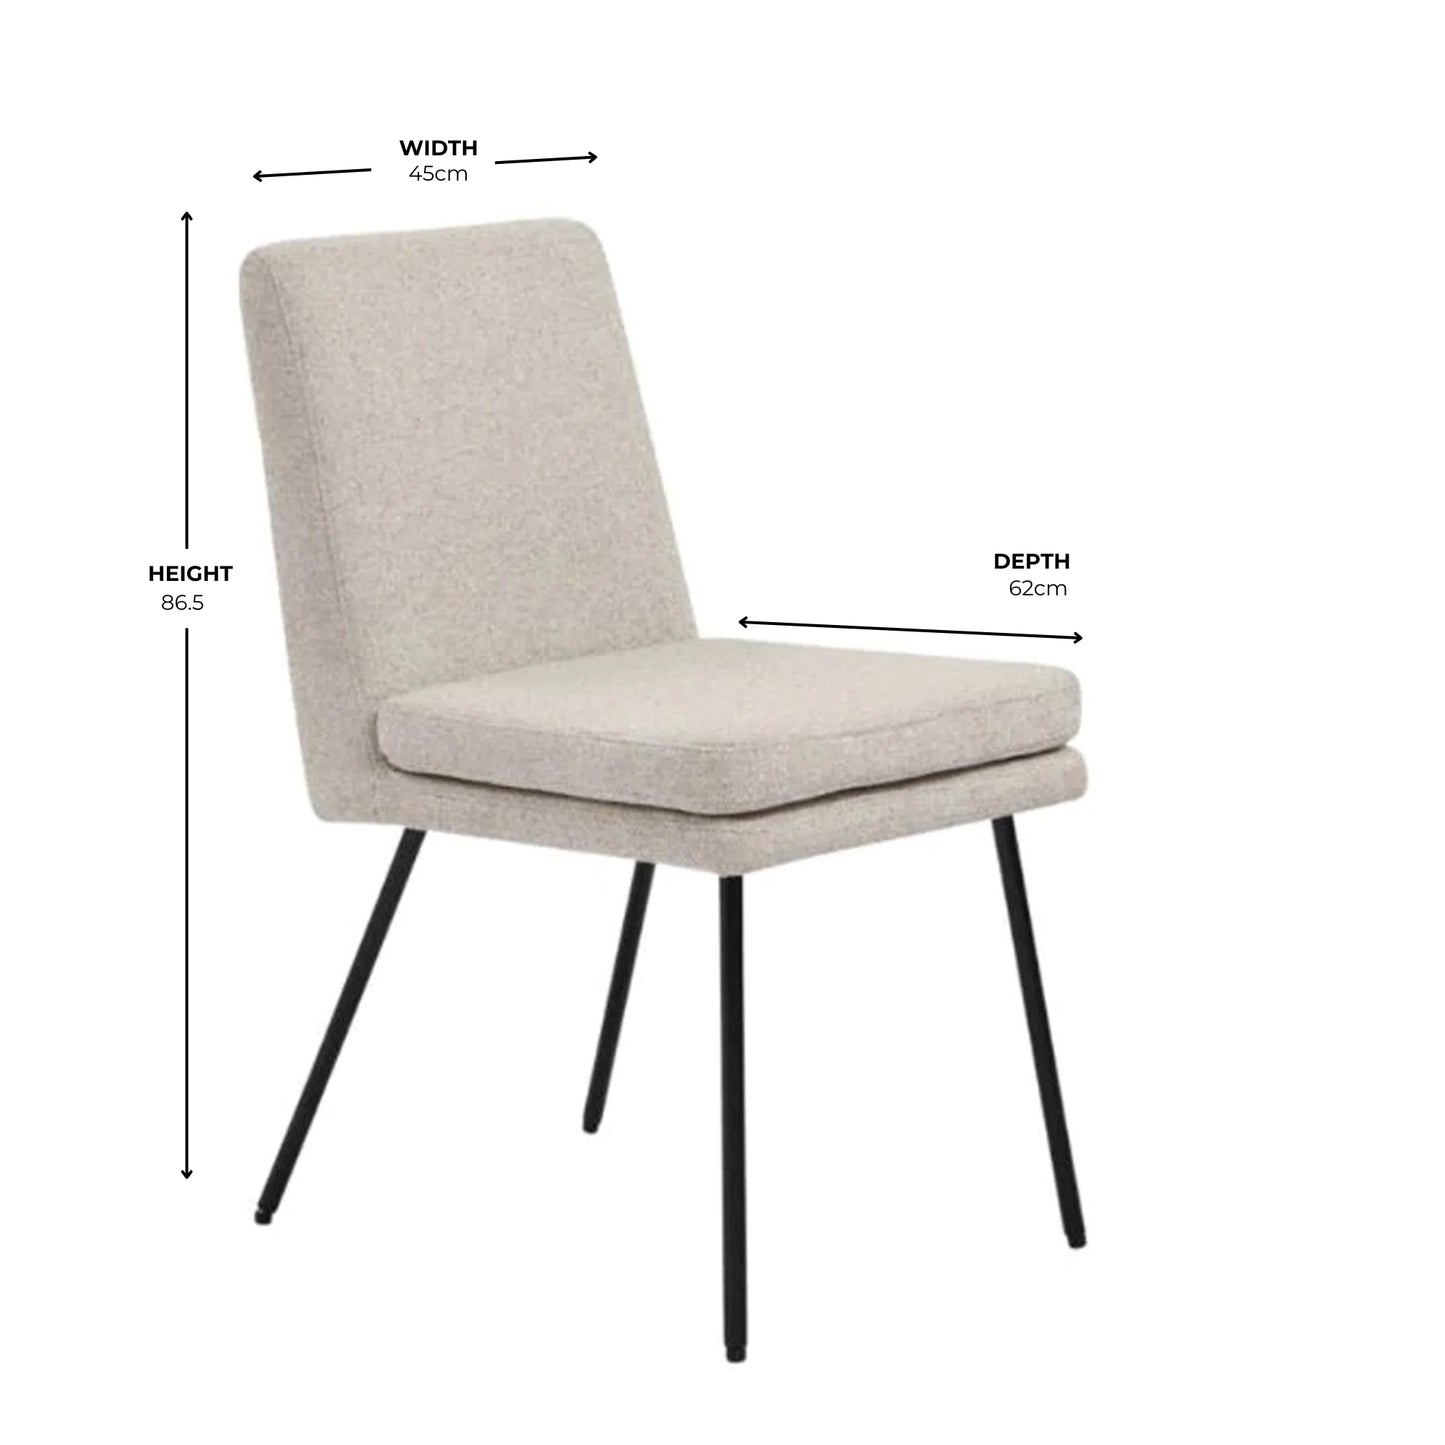 Beige Woven Dining Chair With Black Legs